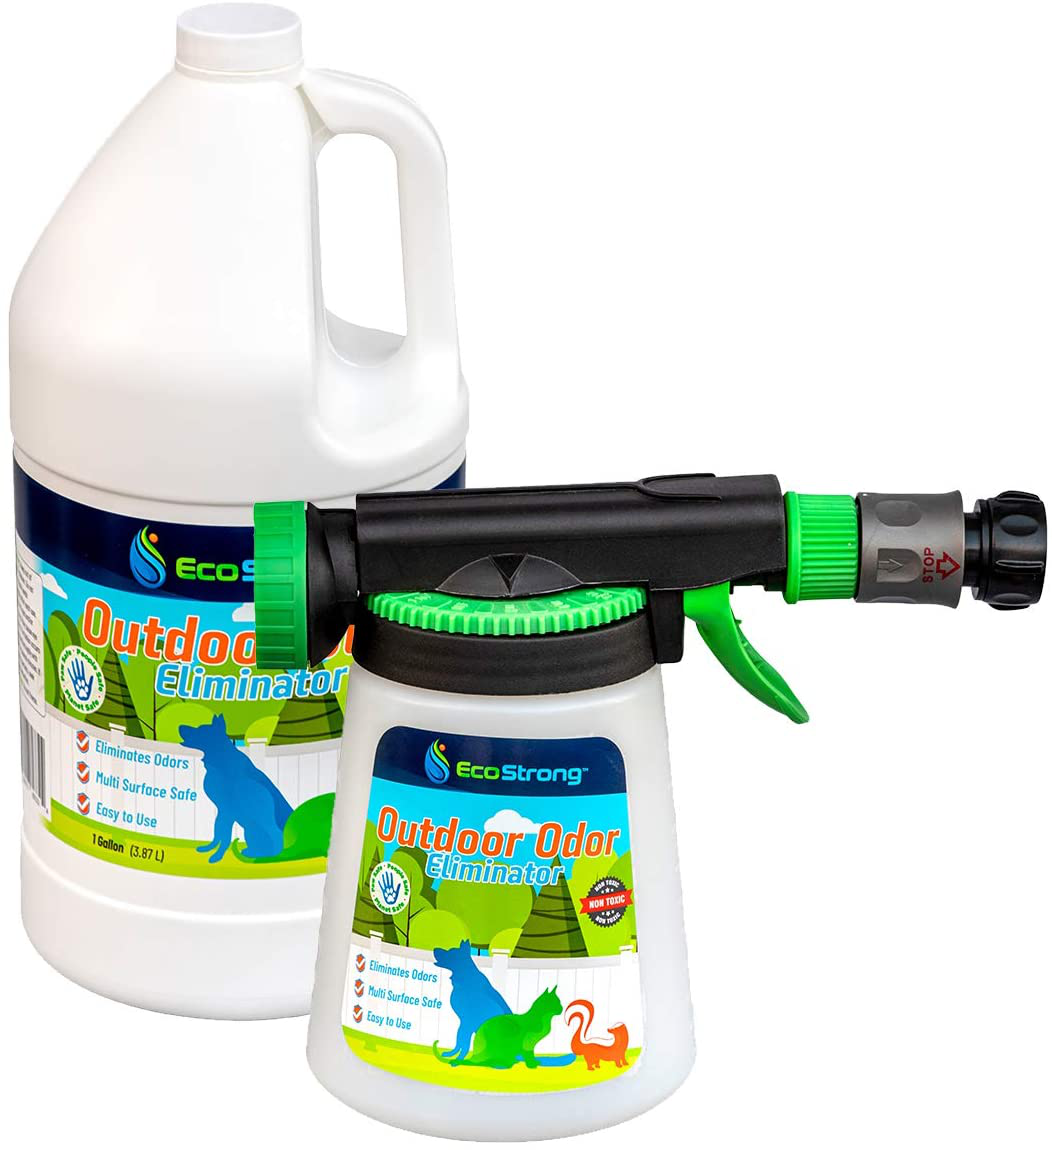 Eco Strong Outdoor Odor Eliminator | outside Dog Urine Enzyme Cleaner – Powerful Pet, Cat, Animal Scent Deodorizer | Professional Strength for Yard, Turf, Kennels, Patios, Decks